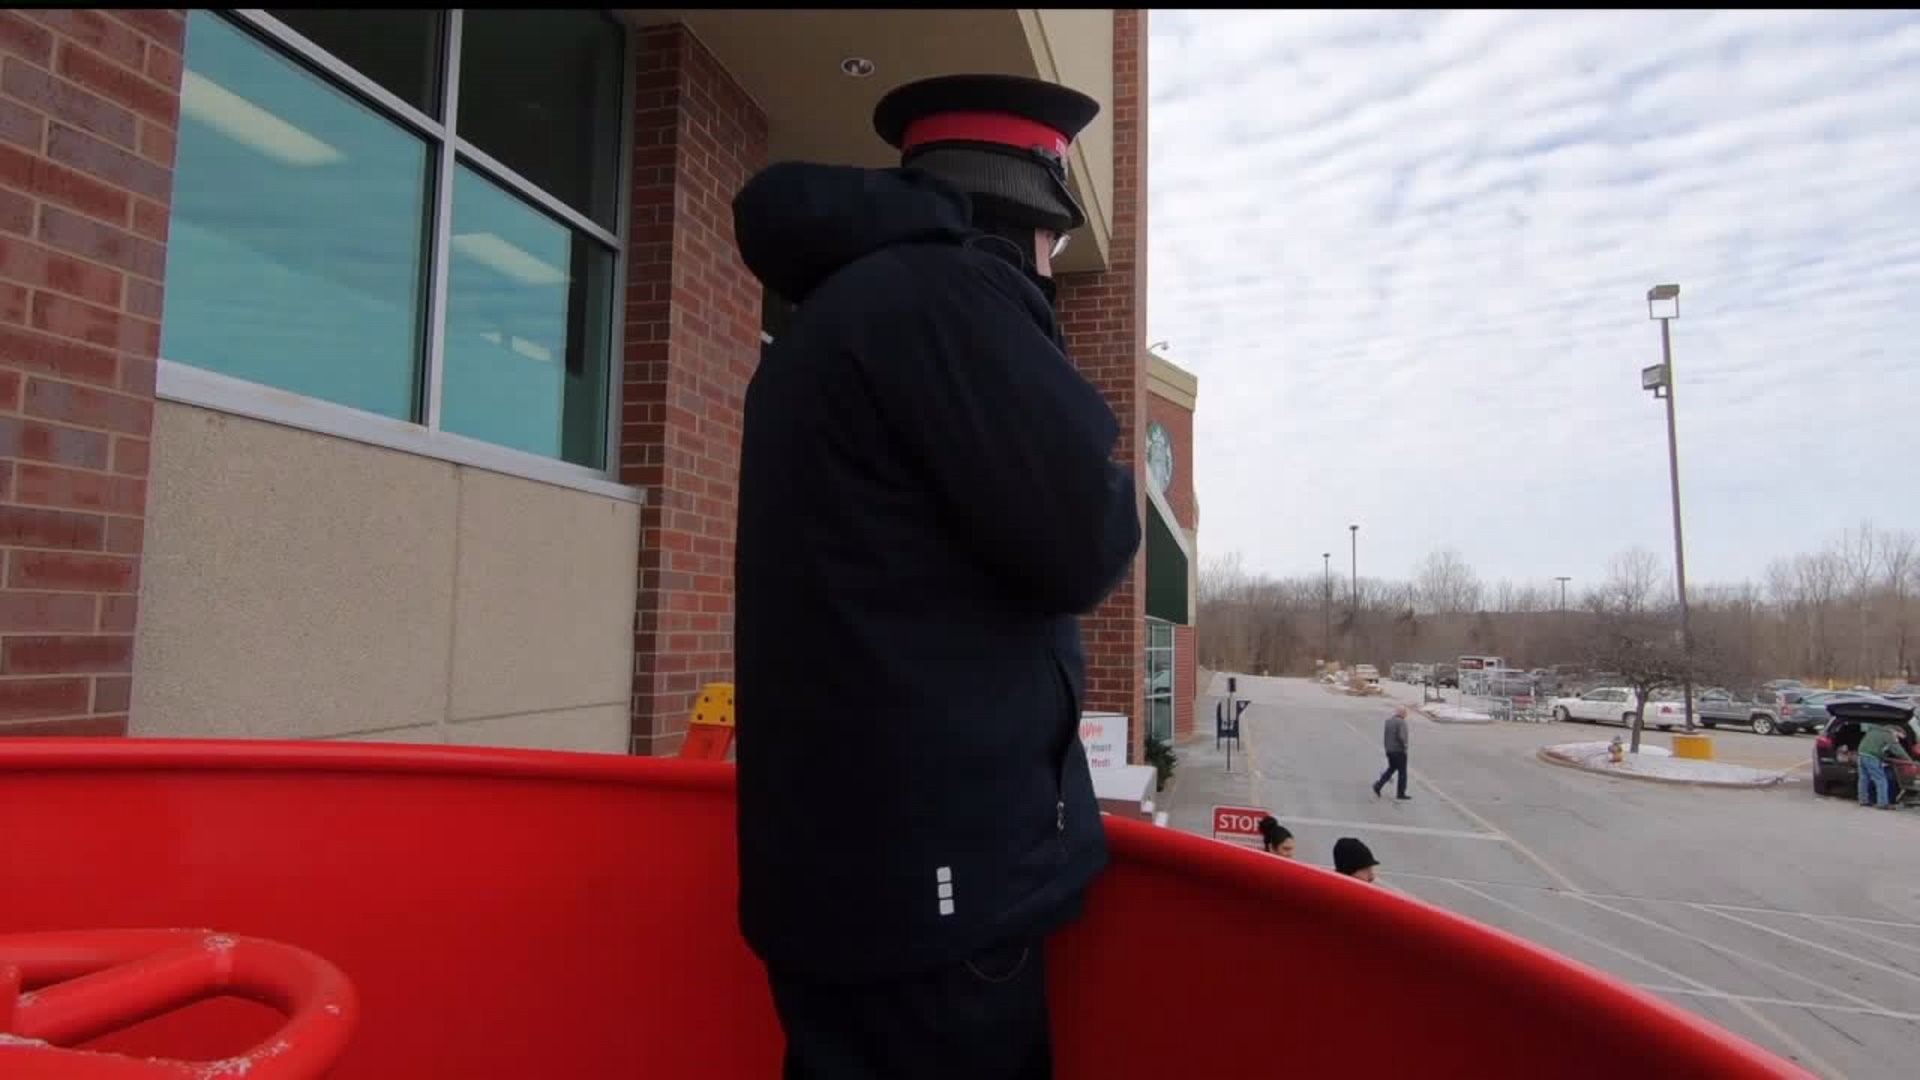 Man Living in Giant Salvation Army Kettle